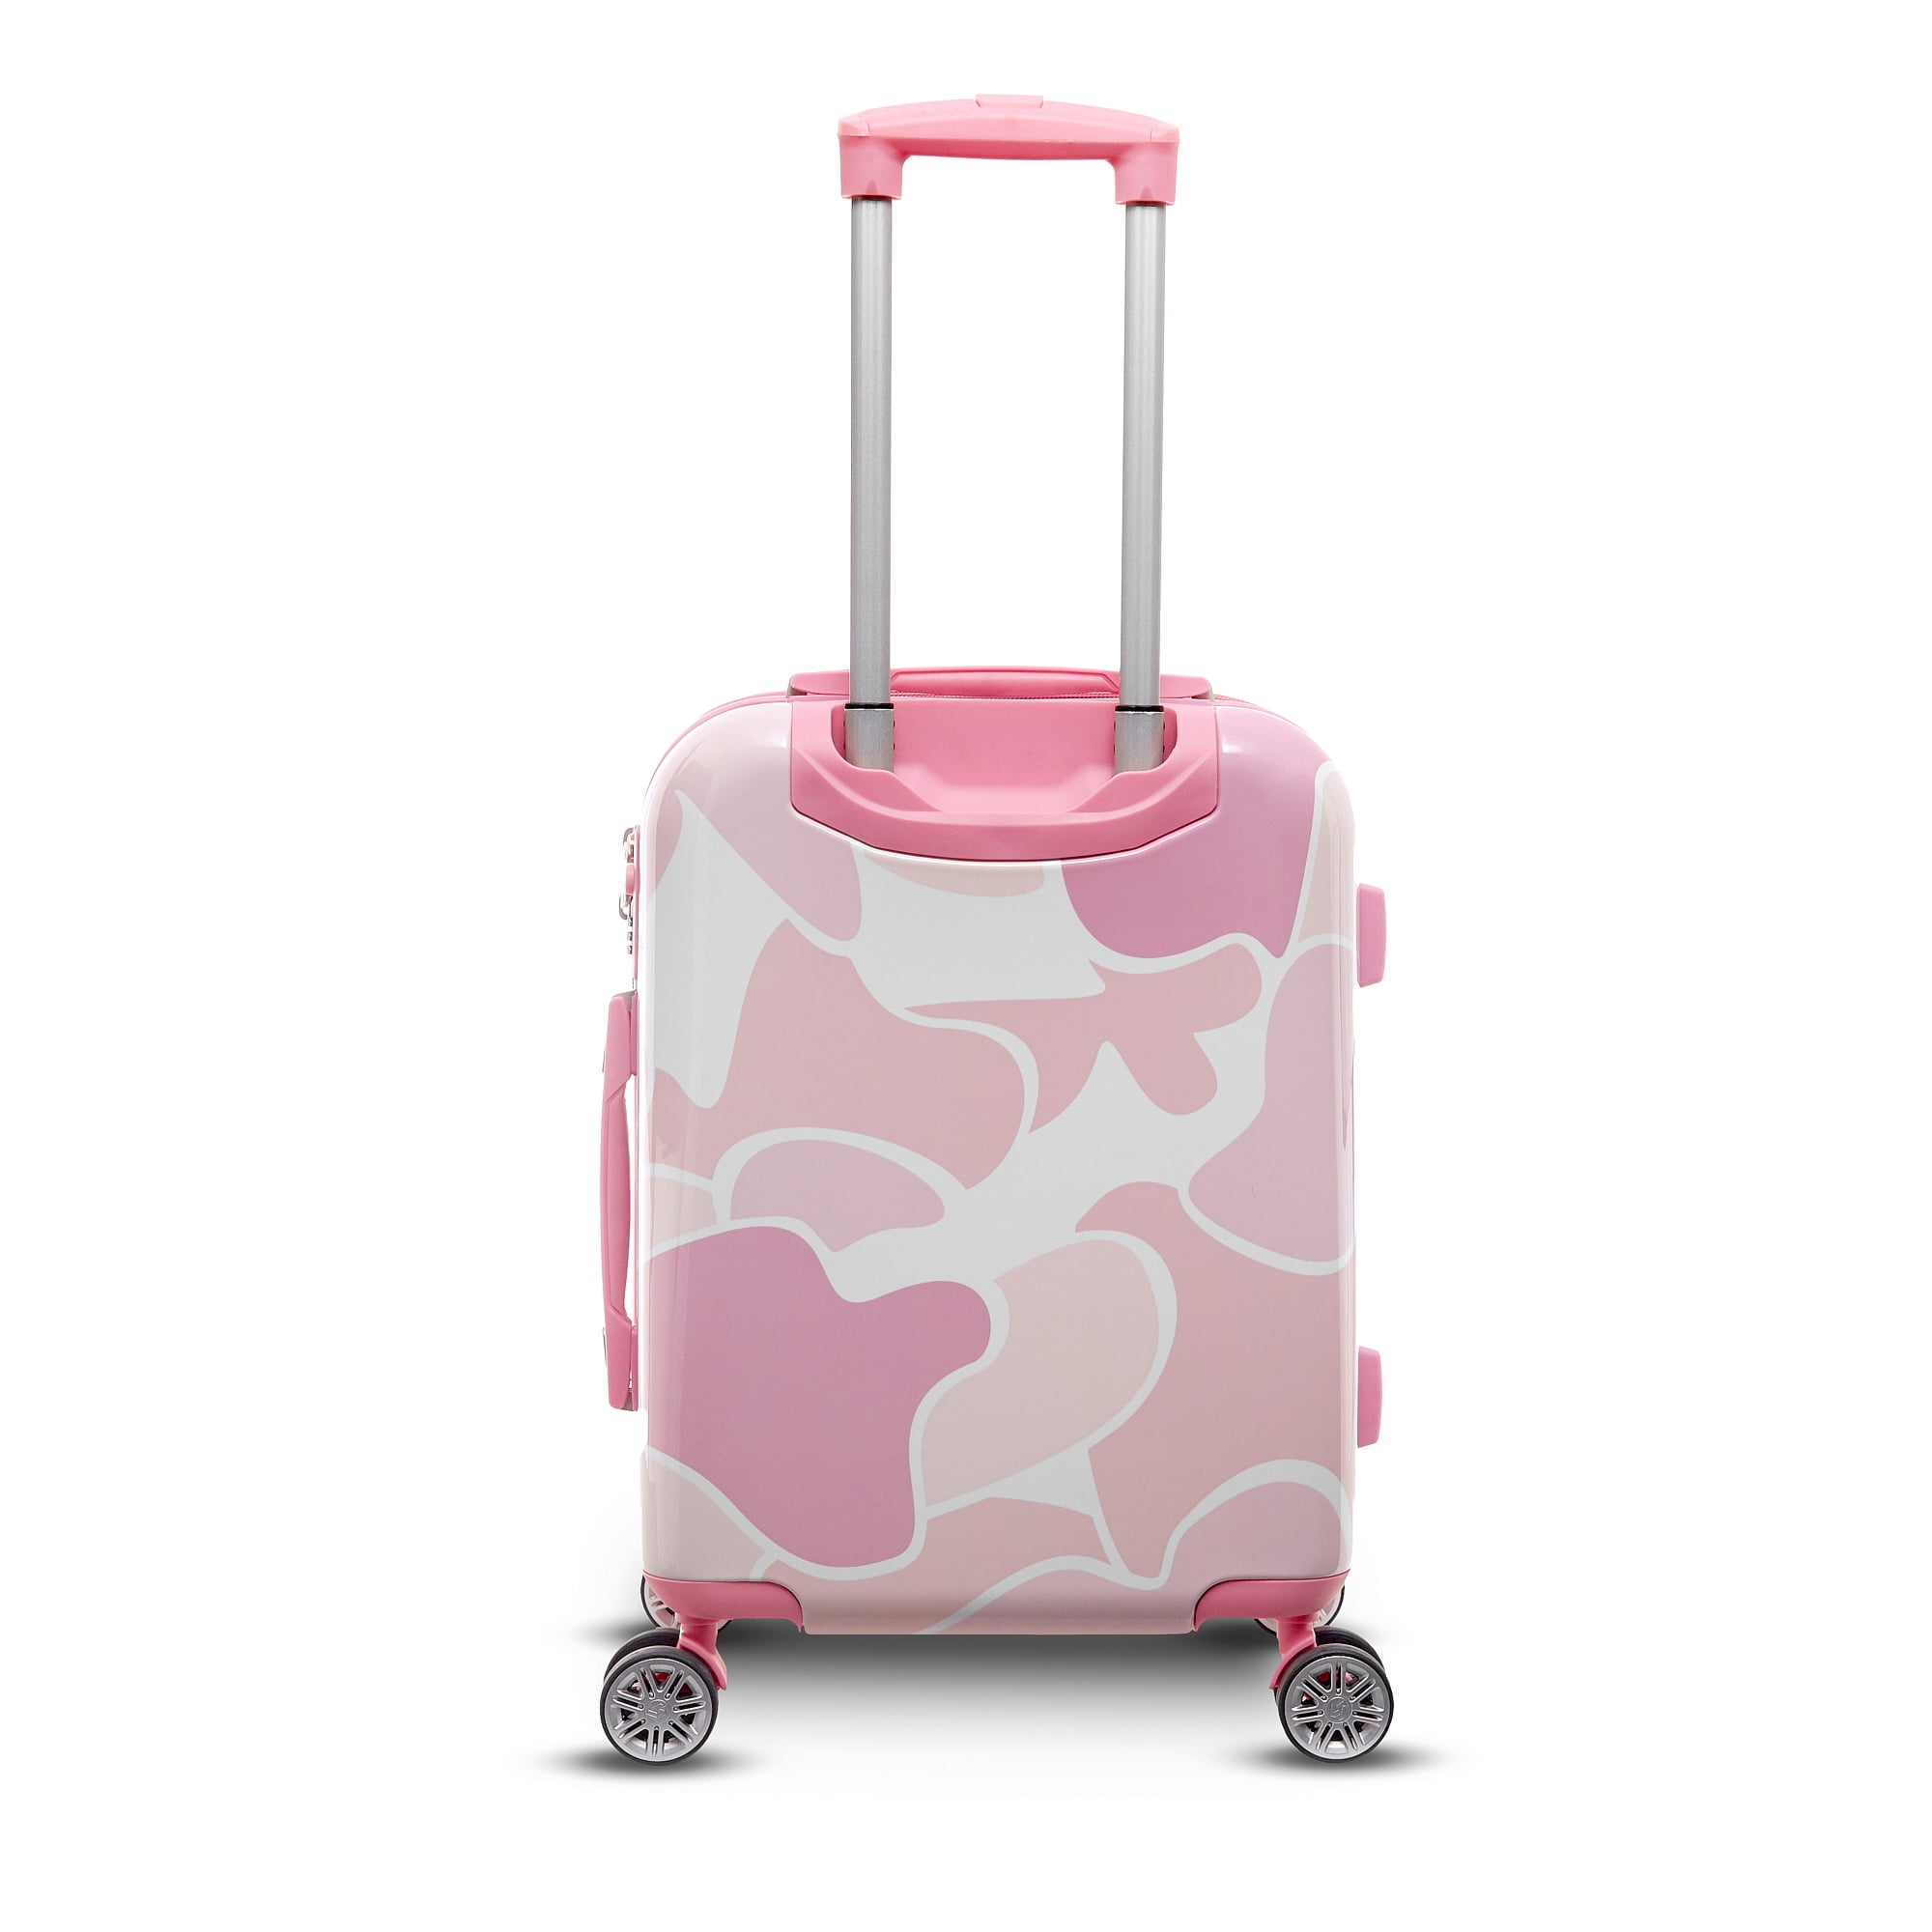 PINK camo rolling luggage